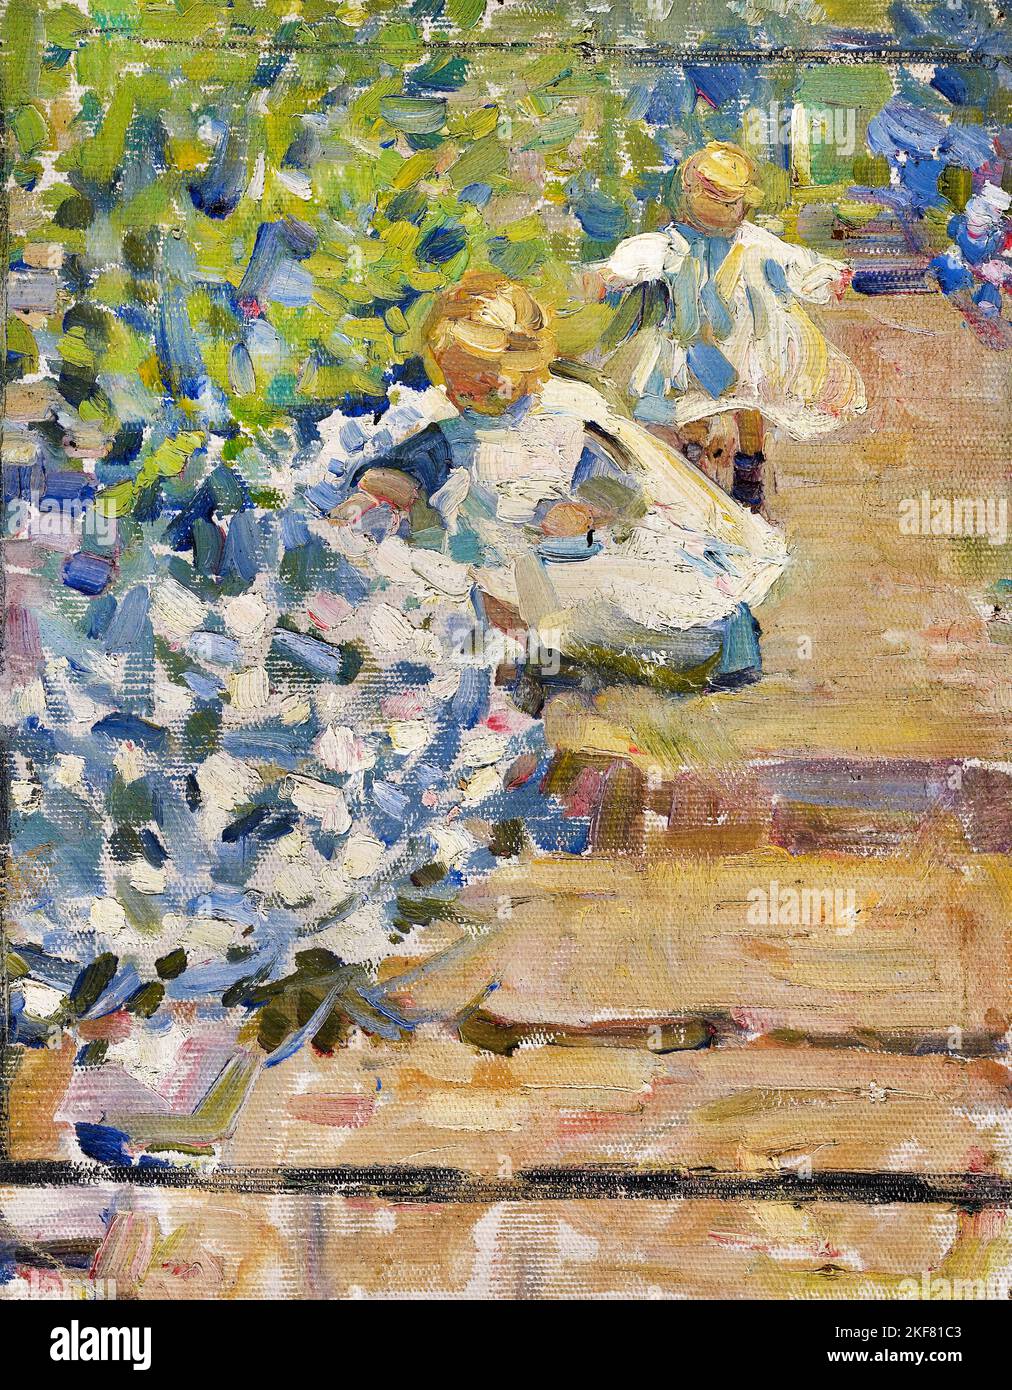 Helen McNicoll; Sketch for 'Picking Flowers'; Circa 1905-1915; Oil on canvas; Art Gallery of Ontario, Toronto, Canada. Stock Photo